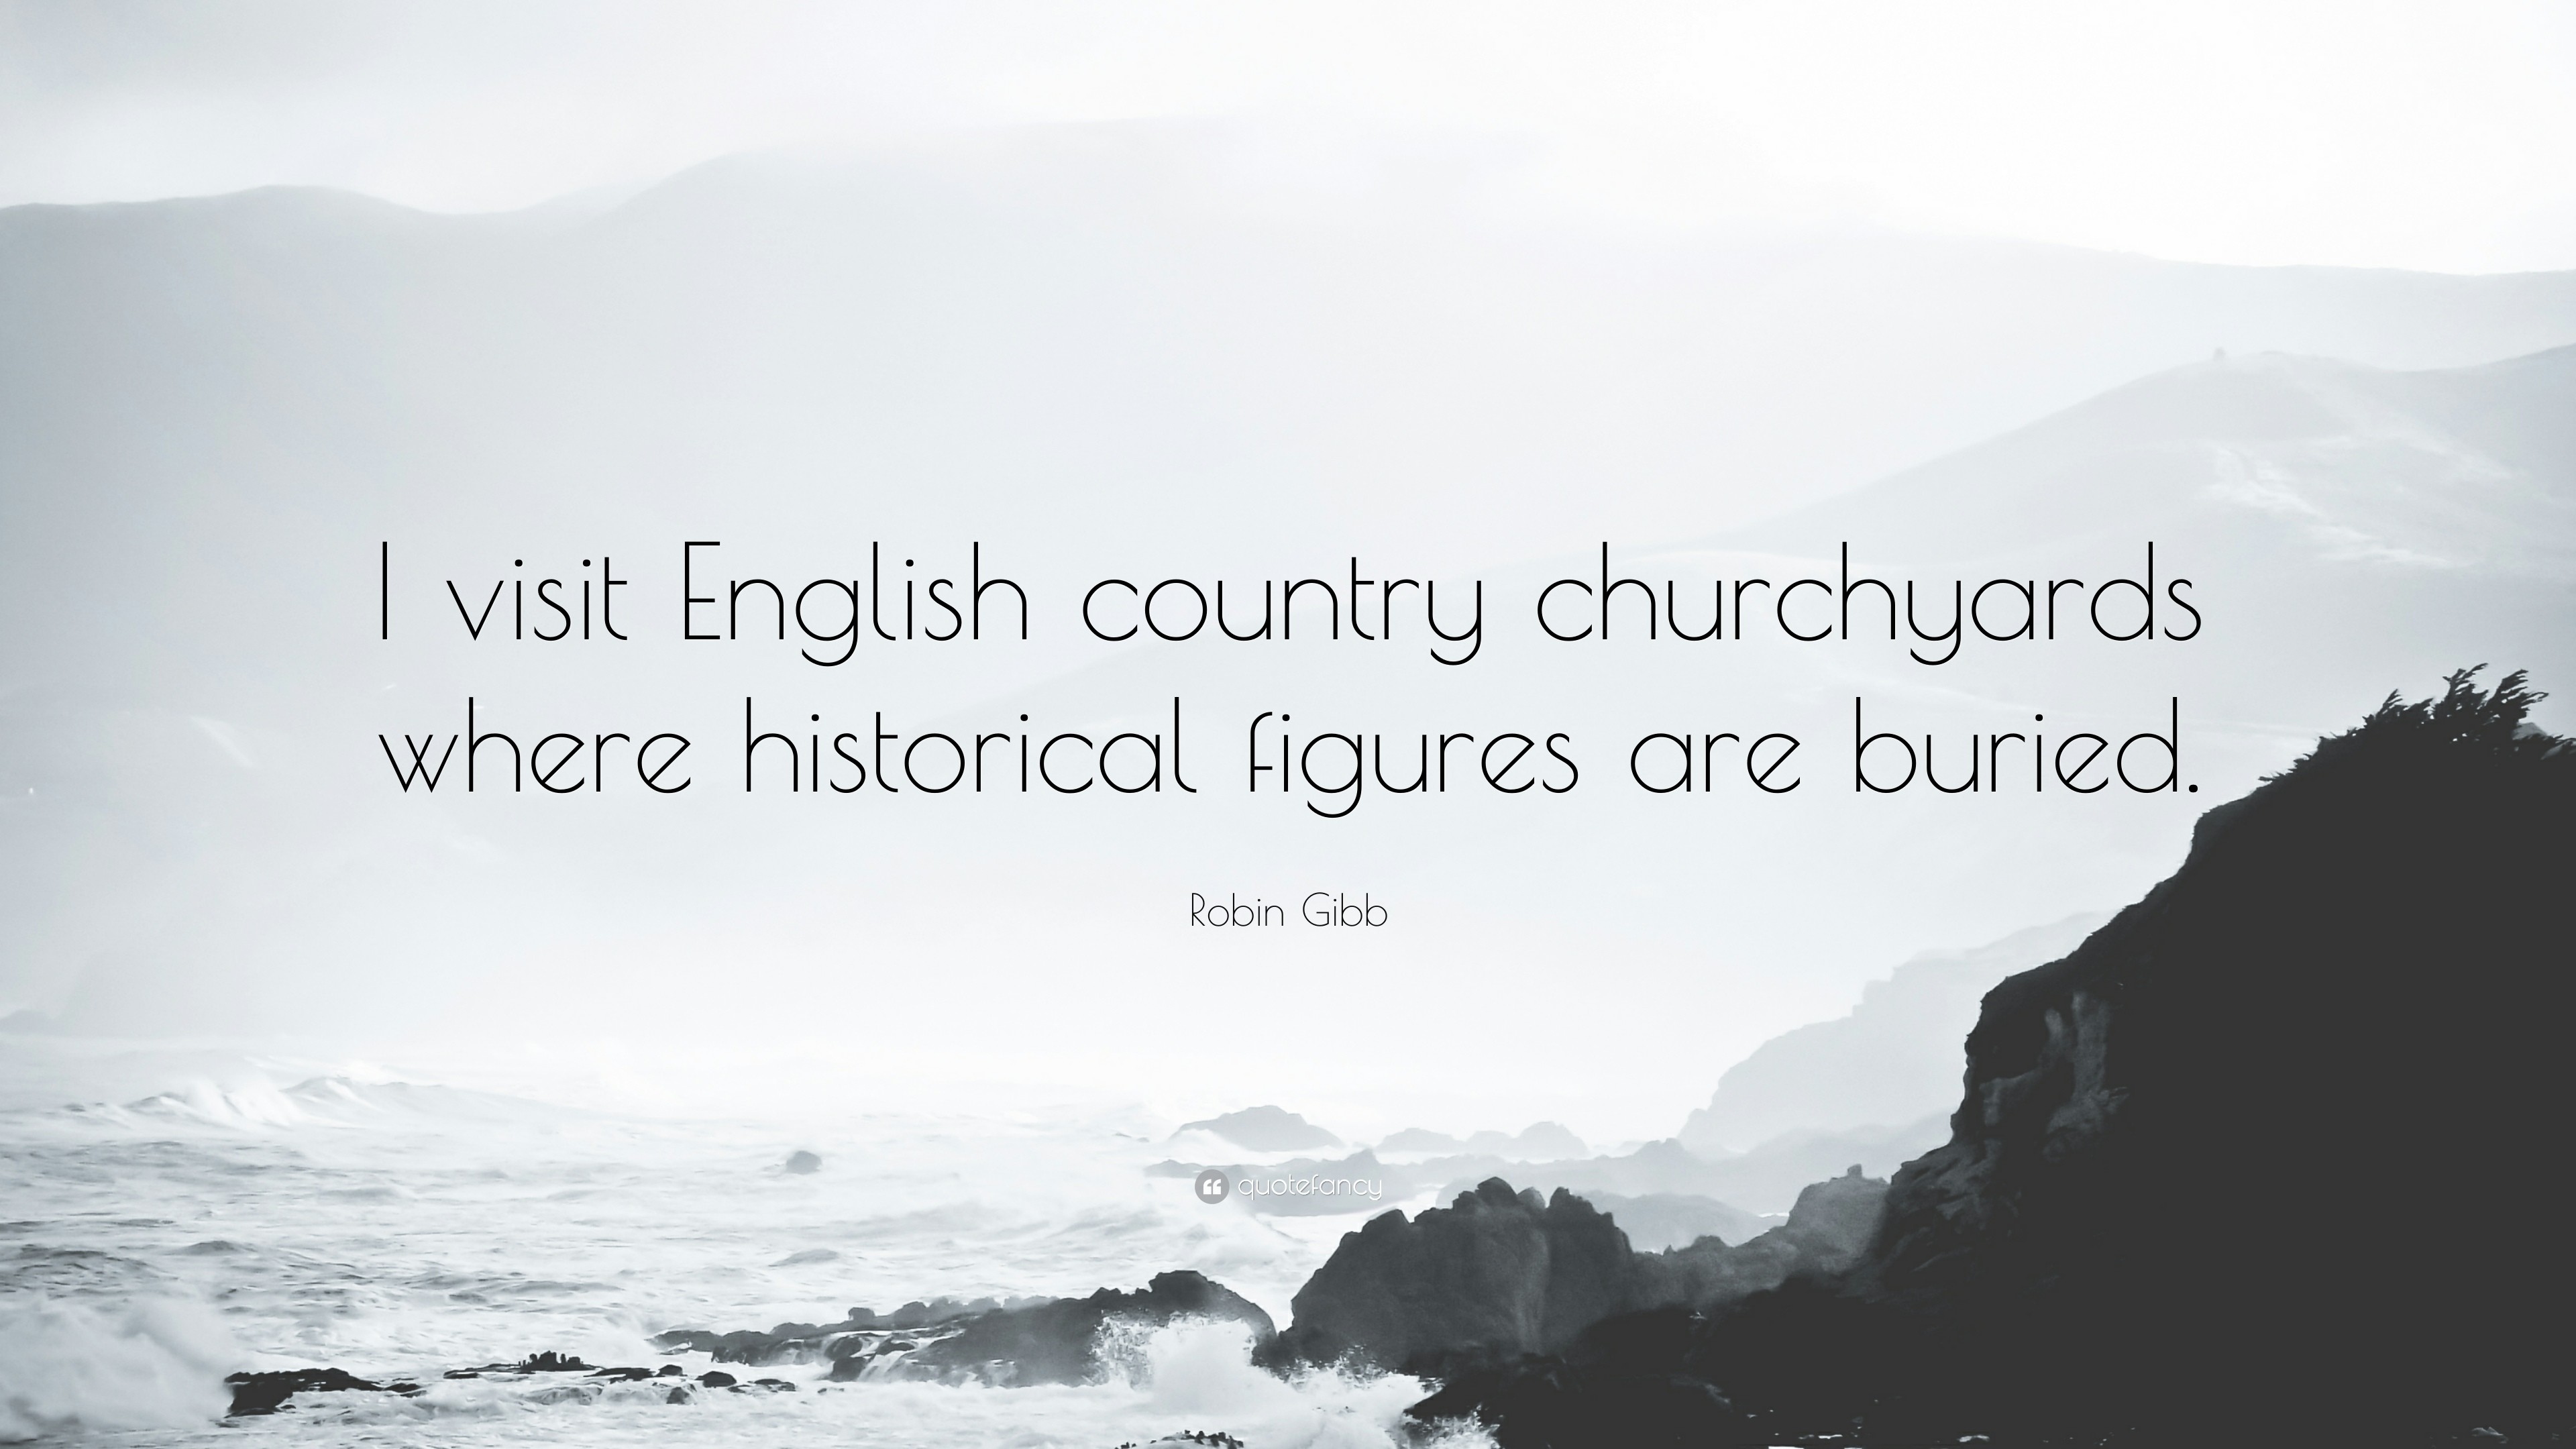 3840x2160 Robin Gibb Quote: “I visit English country churchyards where historical  figures are buried.